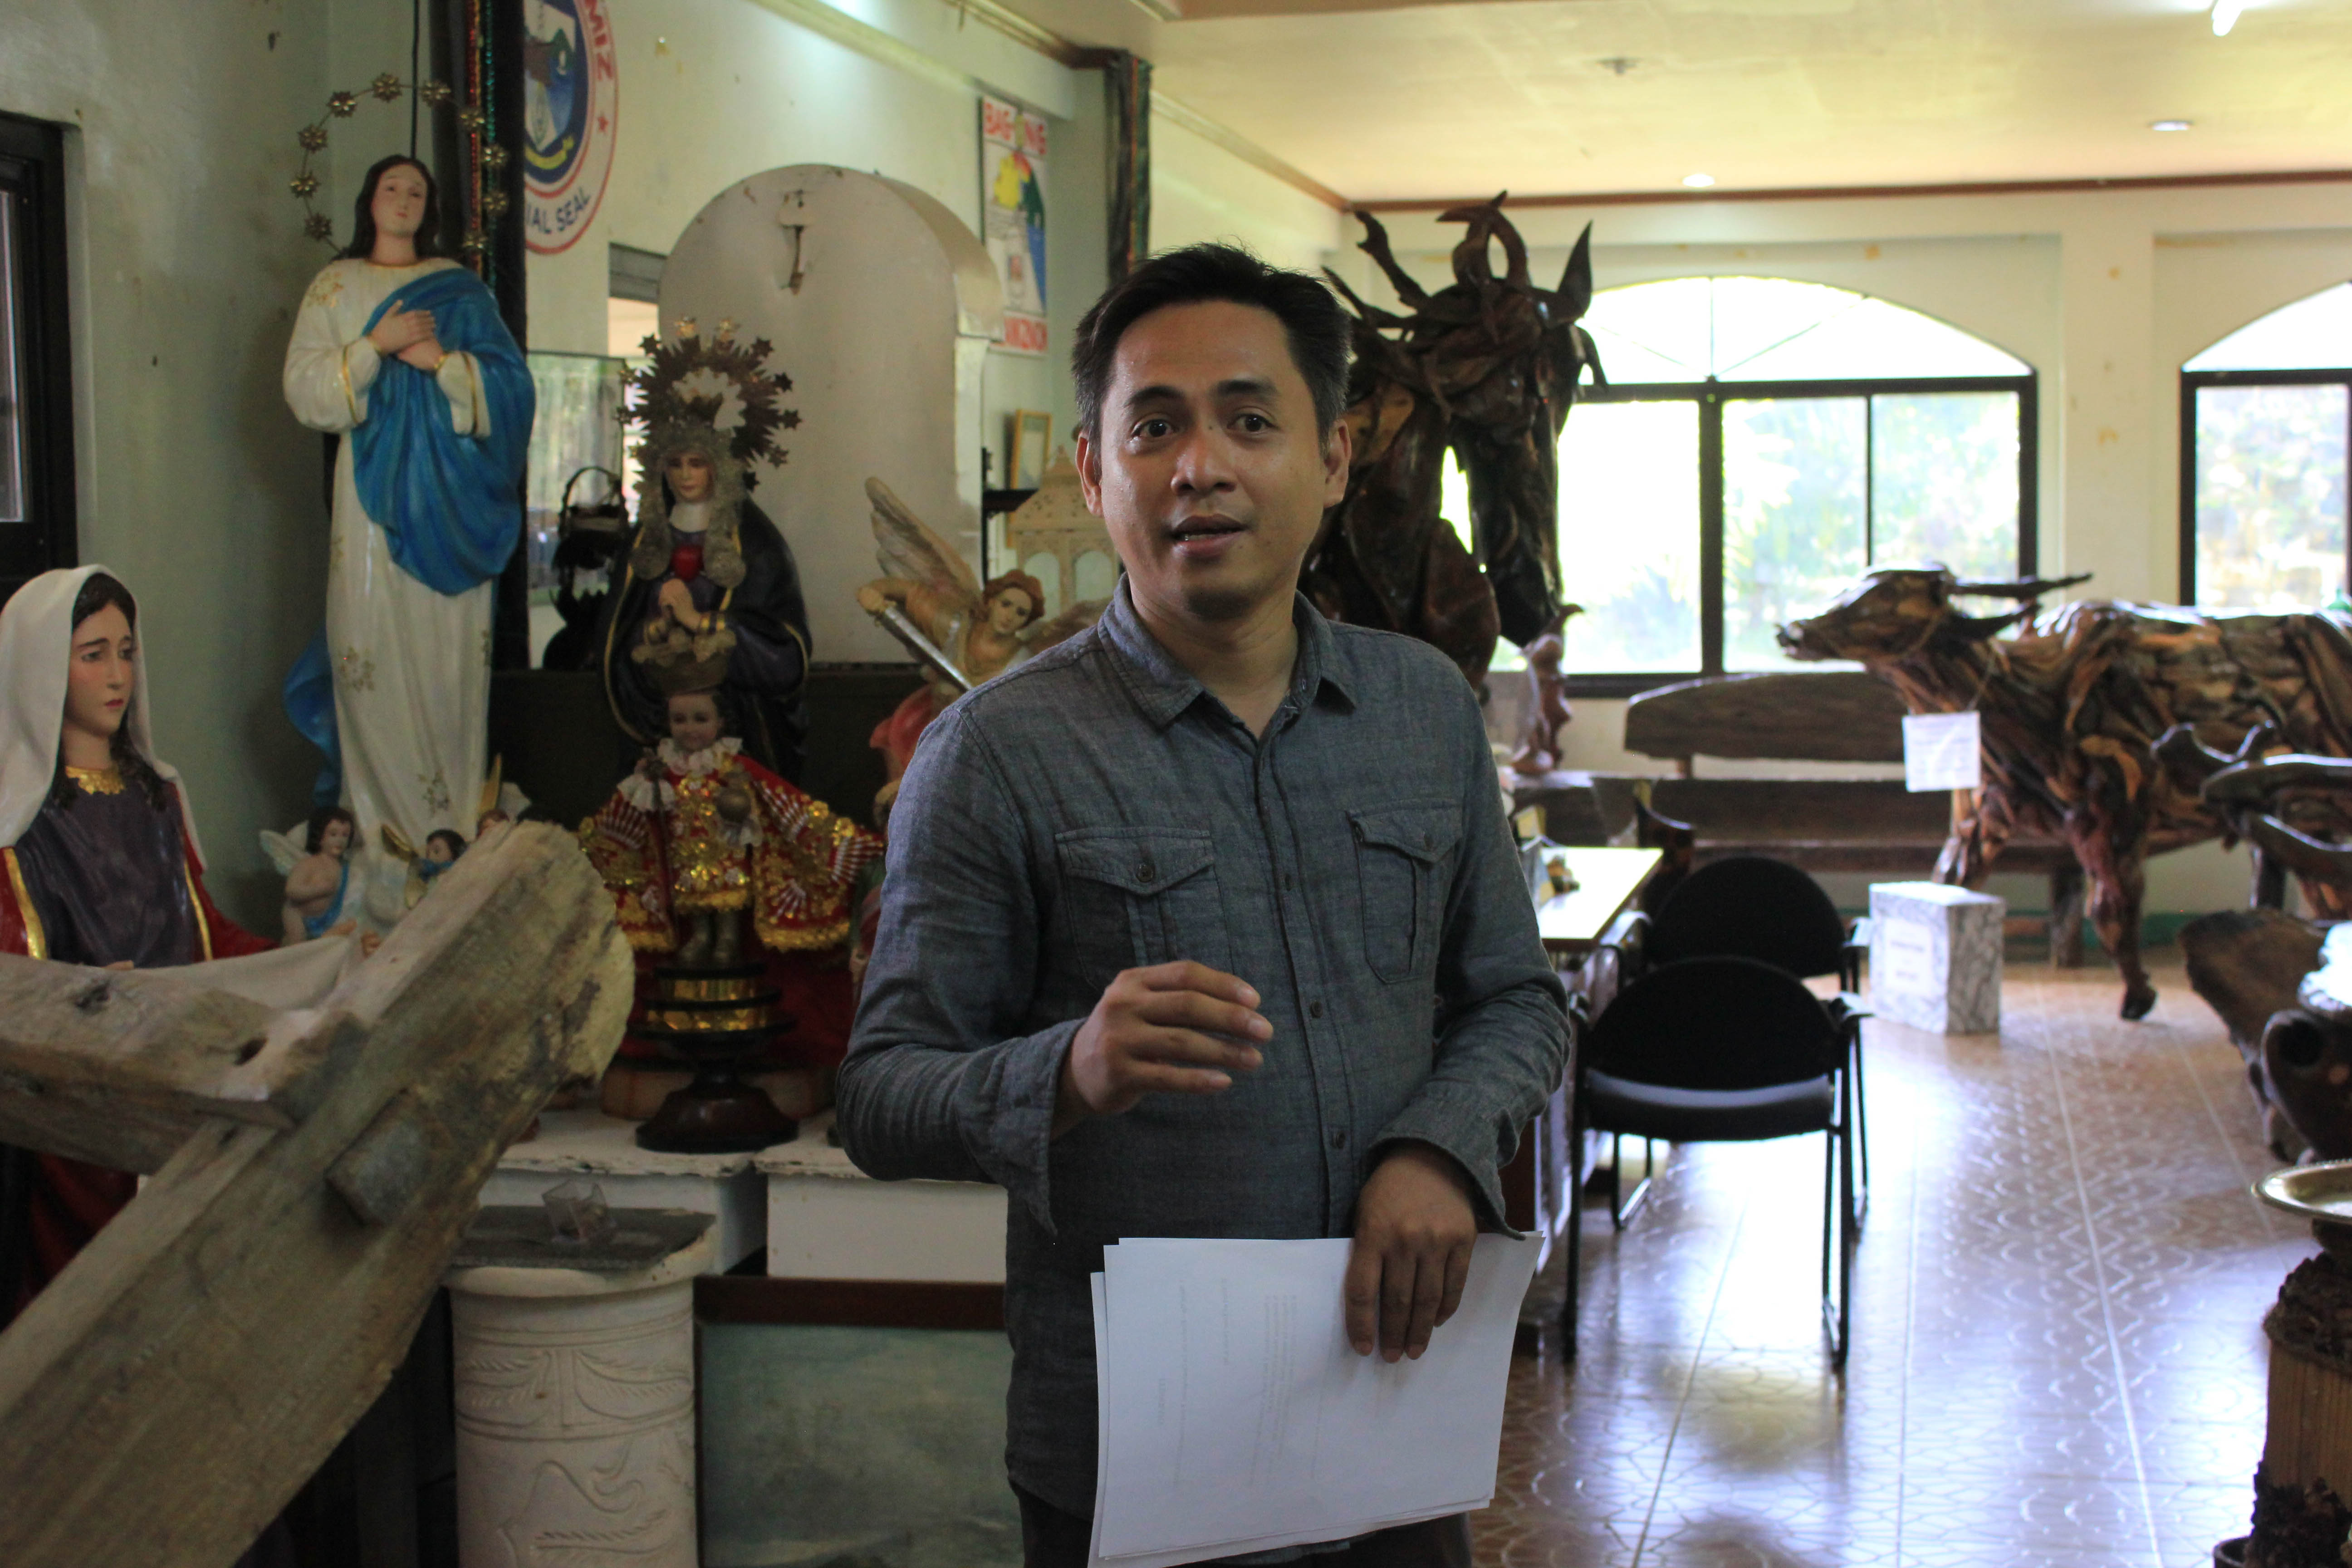 Michael Fuentes, Tourism Staff of Ozamiz City, giving us the city's brief history in the Ozamiz Museum.